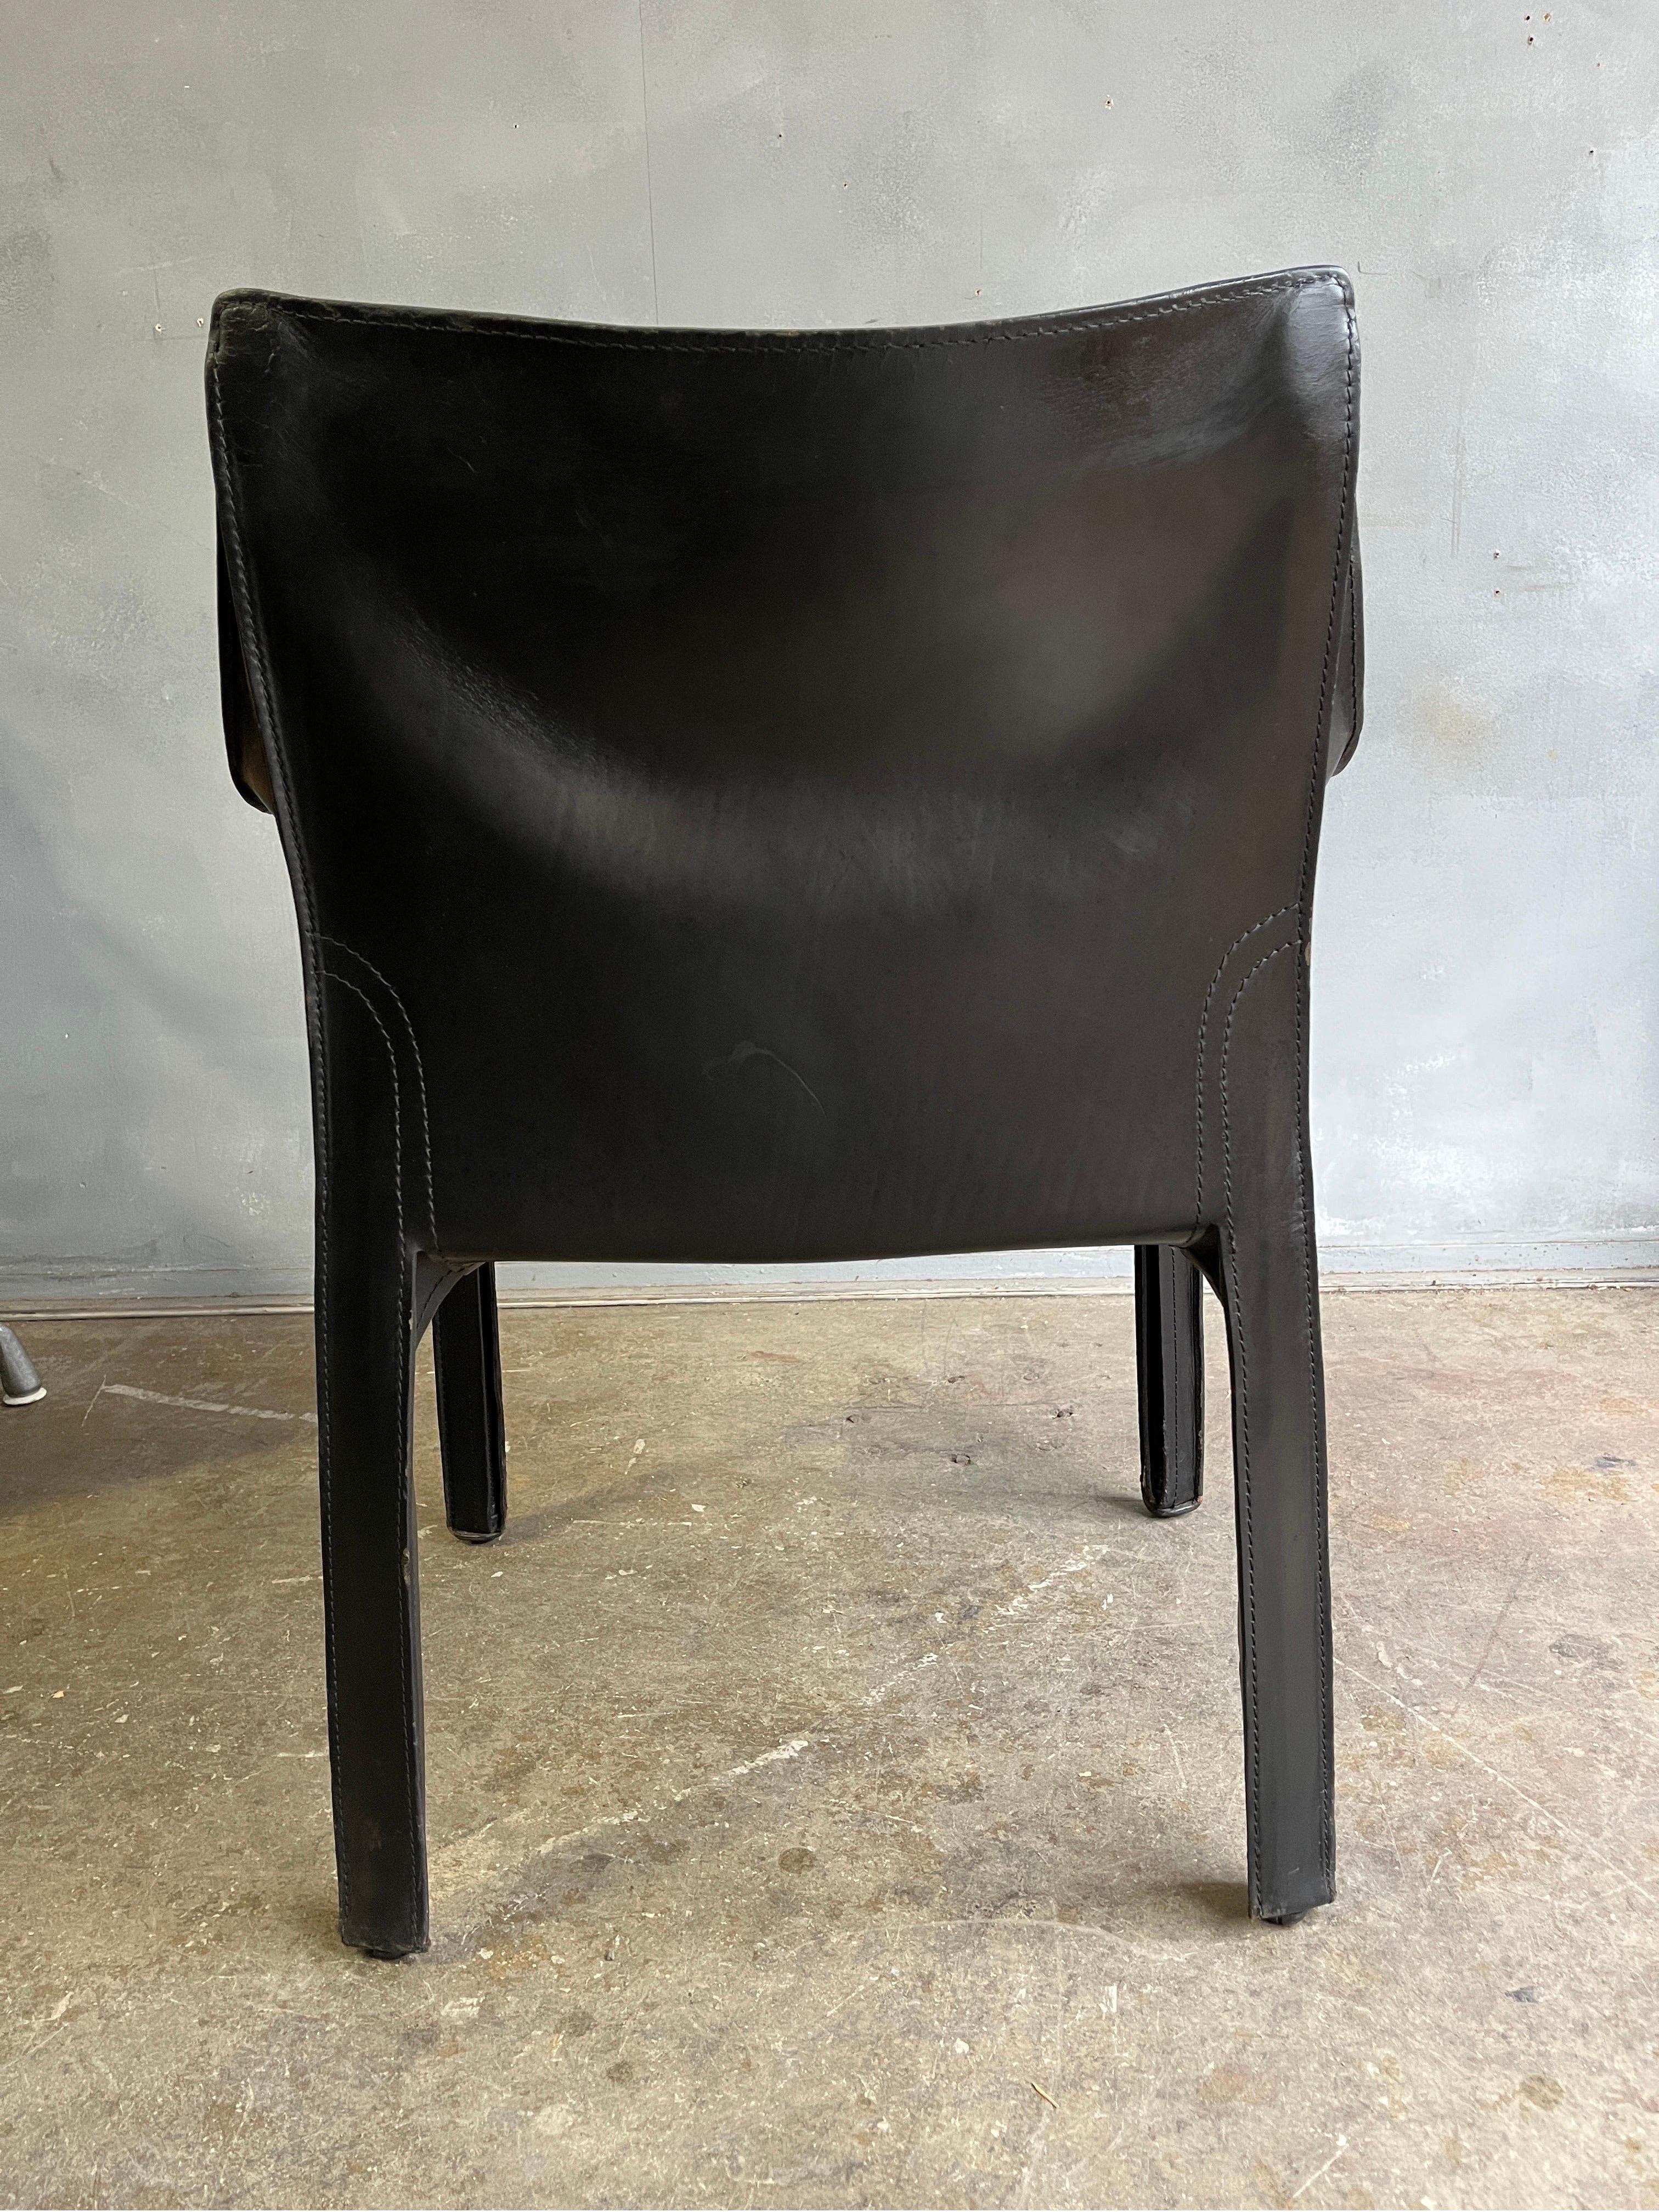 Mario Bellini Cab arm in black saddle leather wrapped around a steel frame. Displaying age appropriate wear and patina with minor scuffs to seat as expected. This design is part of the permanent collection at the MoMA.

Model 413.